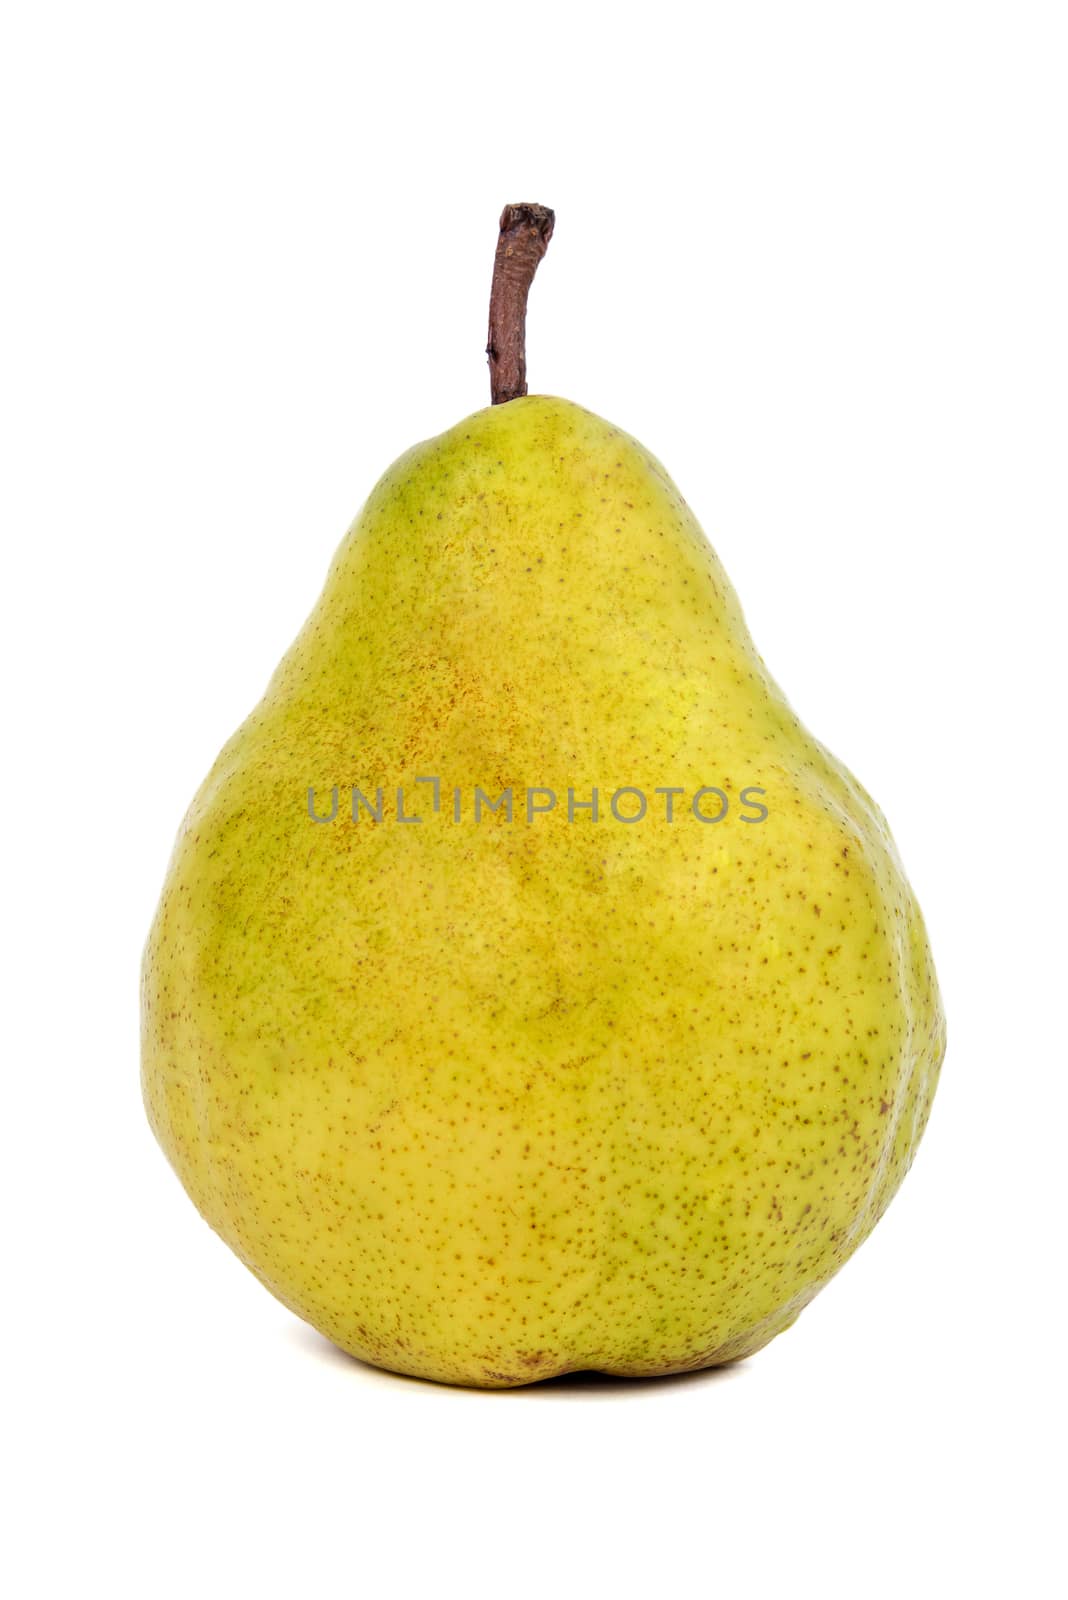 Fresh pear on white background by mkos83